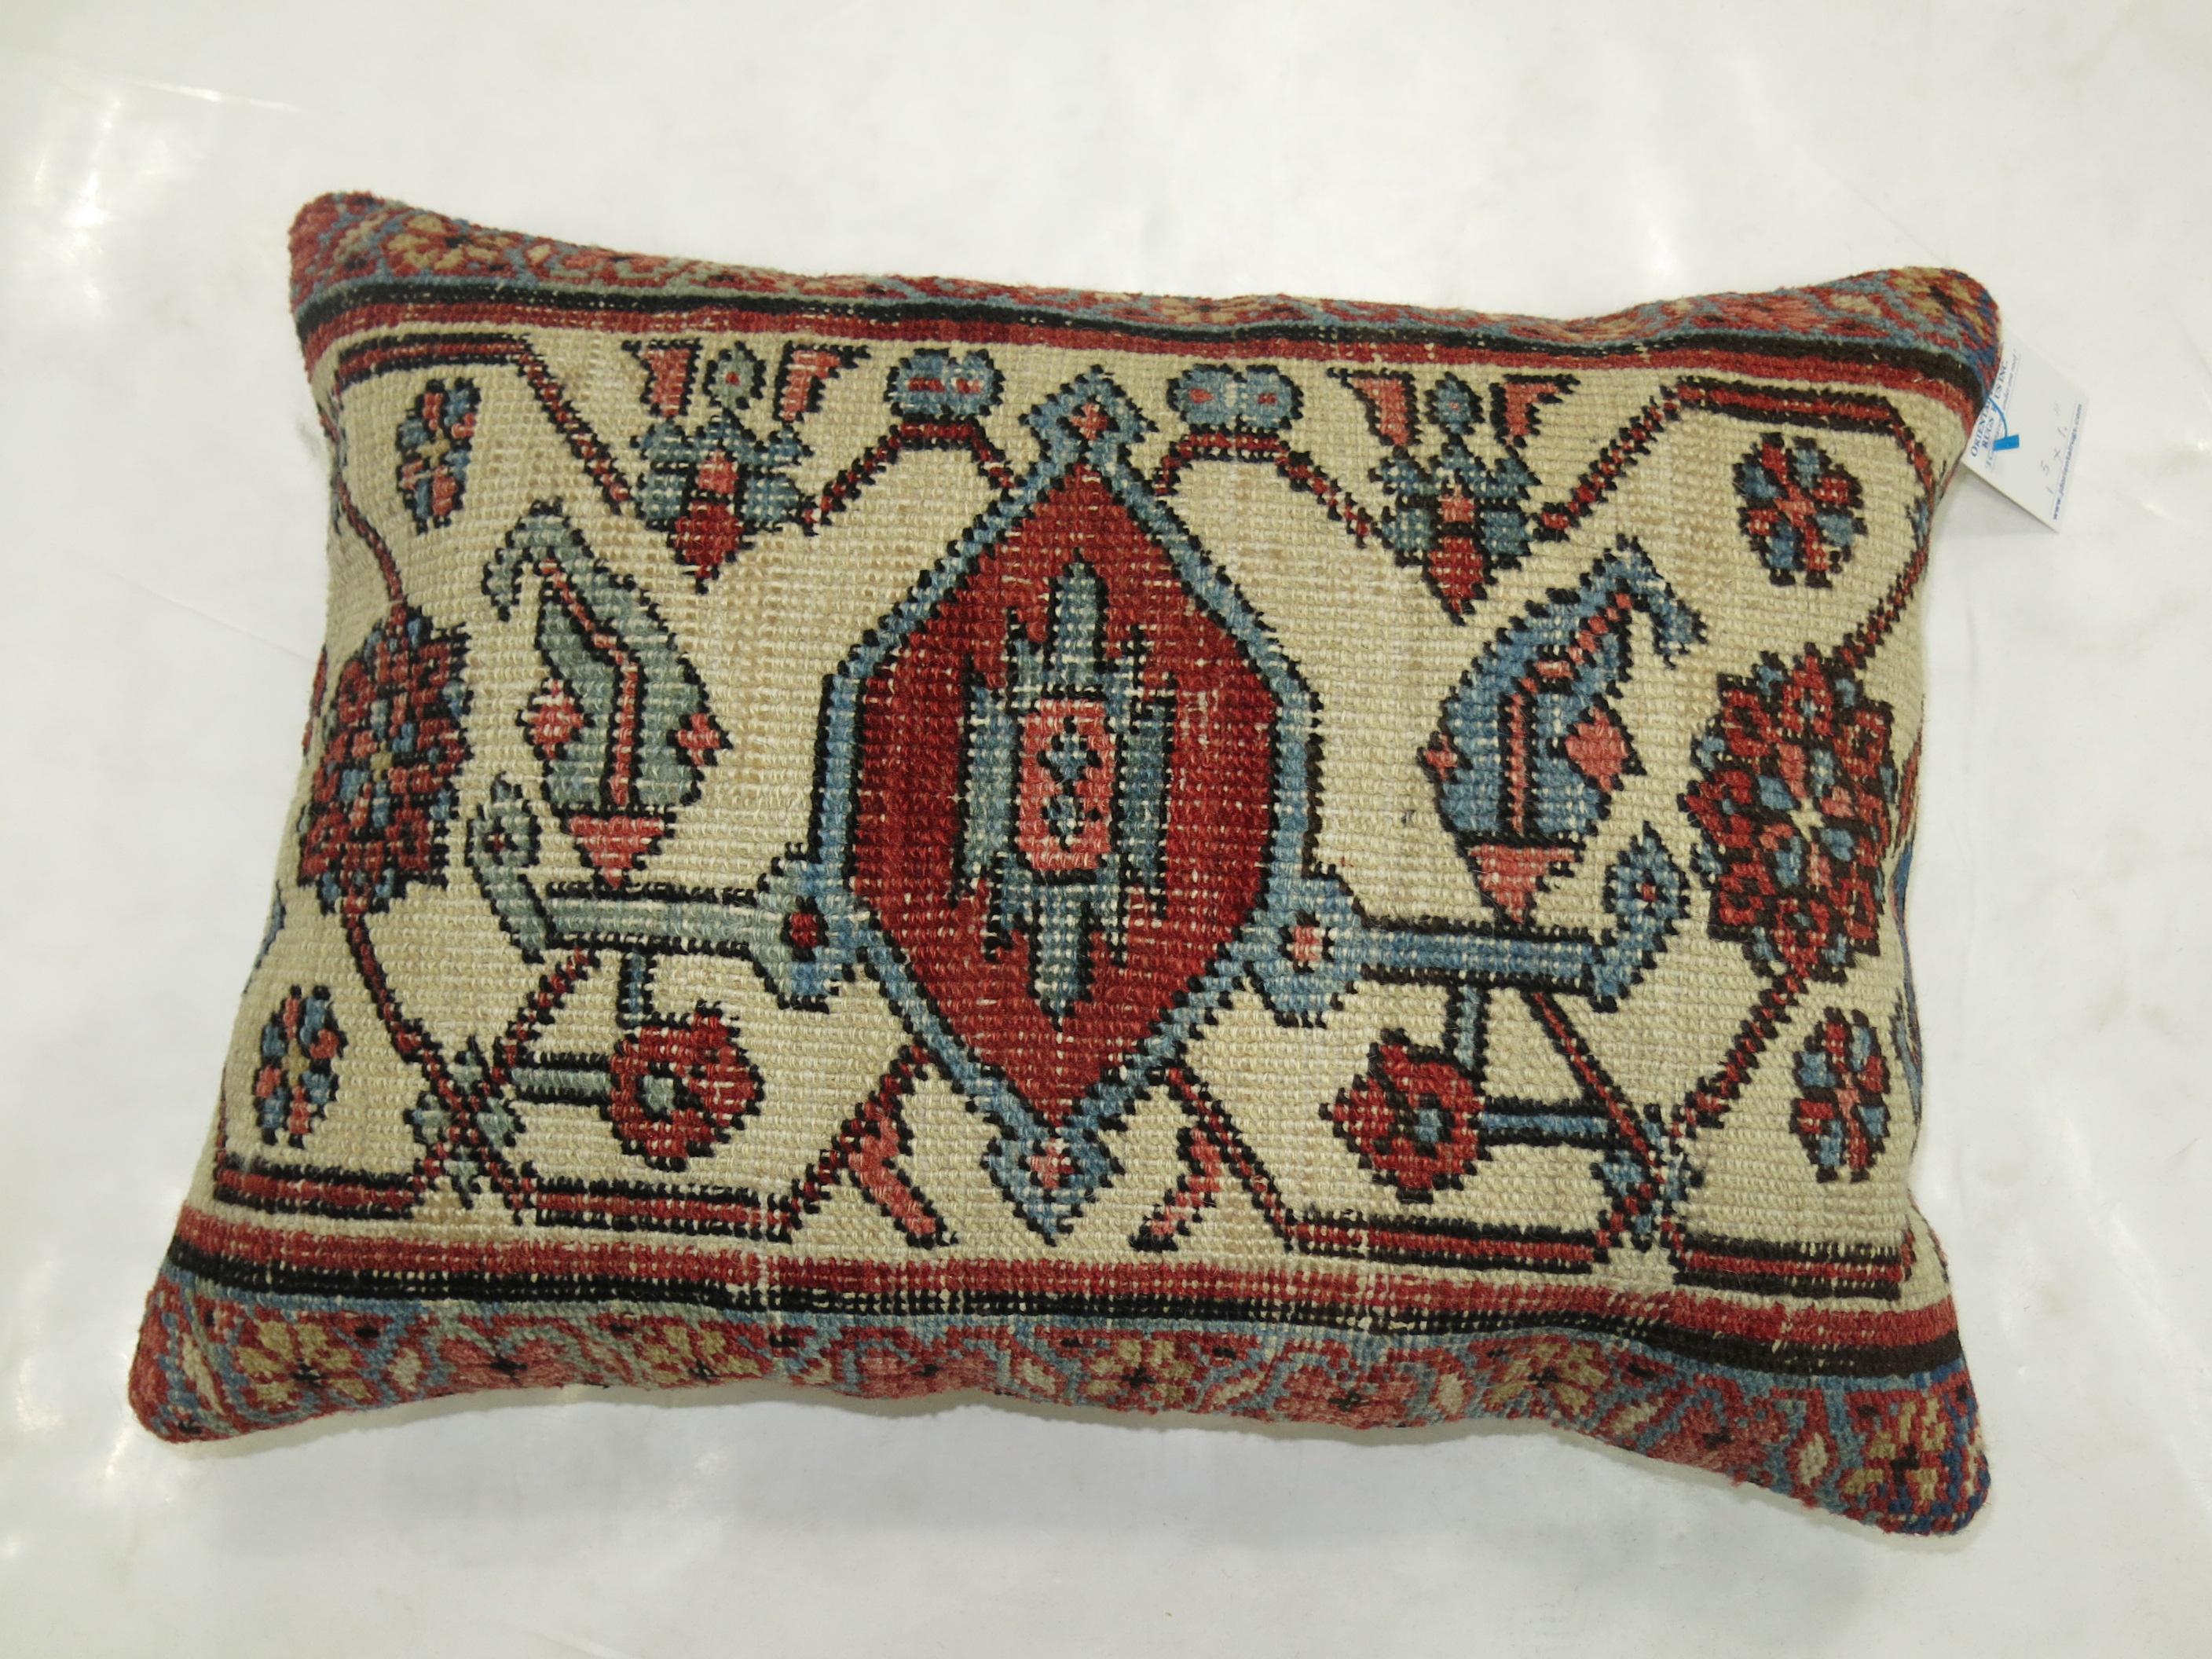 Pillow made from a fine quality Persian Serapi rug. Ivory Medallion with red brick , blue and brown accents

Measures: 17